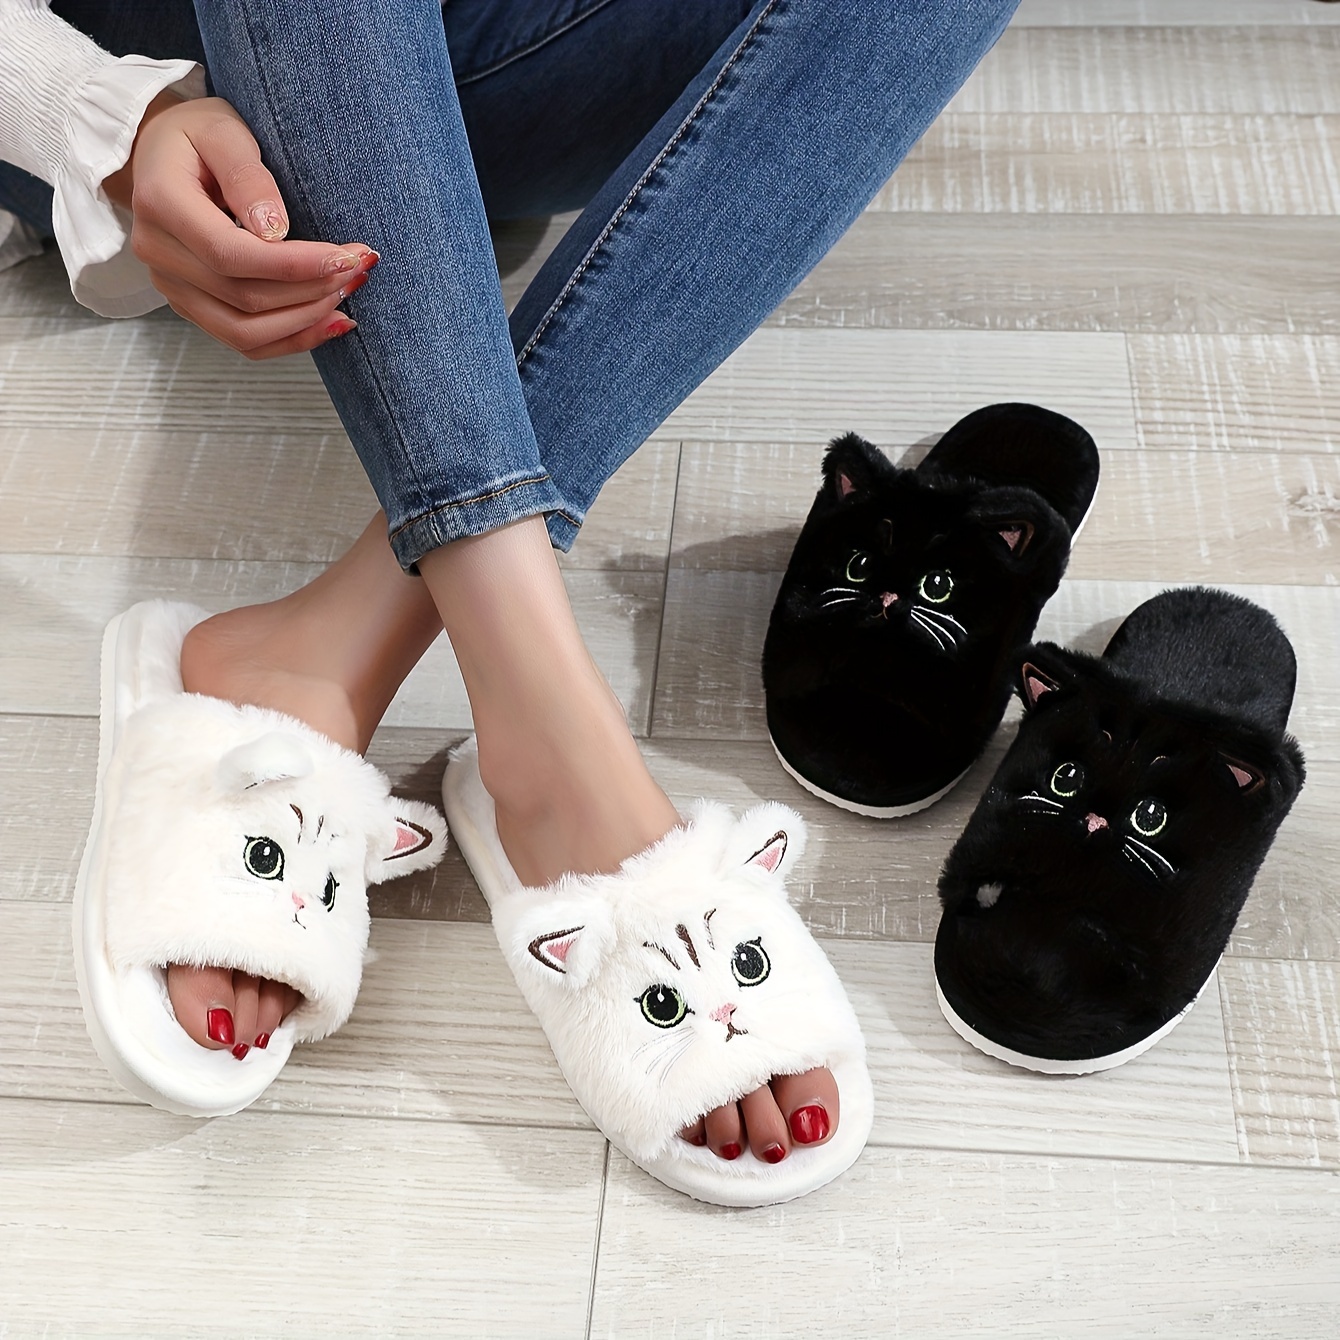 

Cute & Soft Plush Cat Slippers, Winter Fuzzy Warm Non-slip Indoor Bedroom Footwear, Comfy Cozy Home Slides